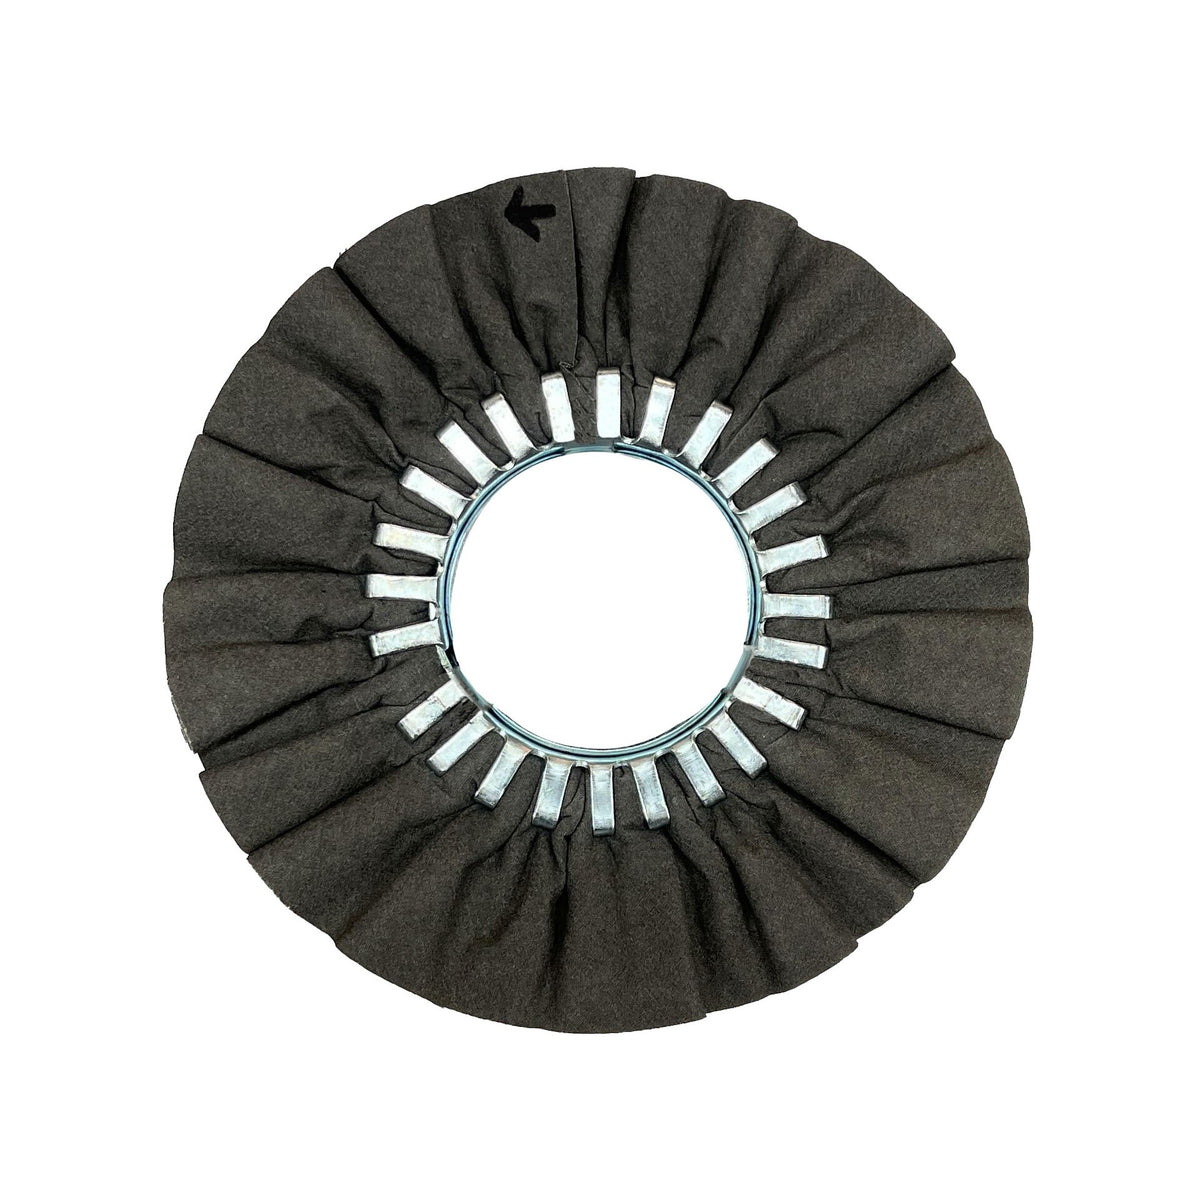 CLOSEOUT: Airway Buffing Wheels